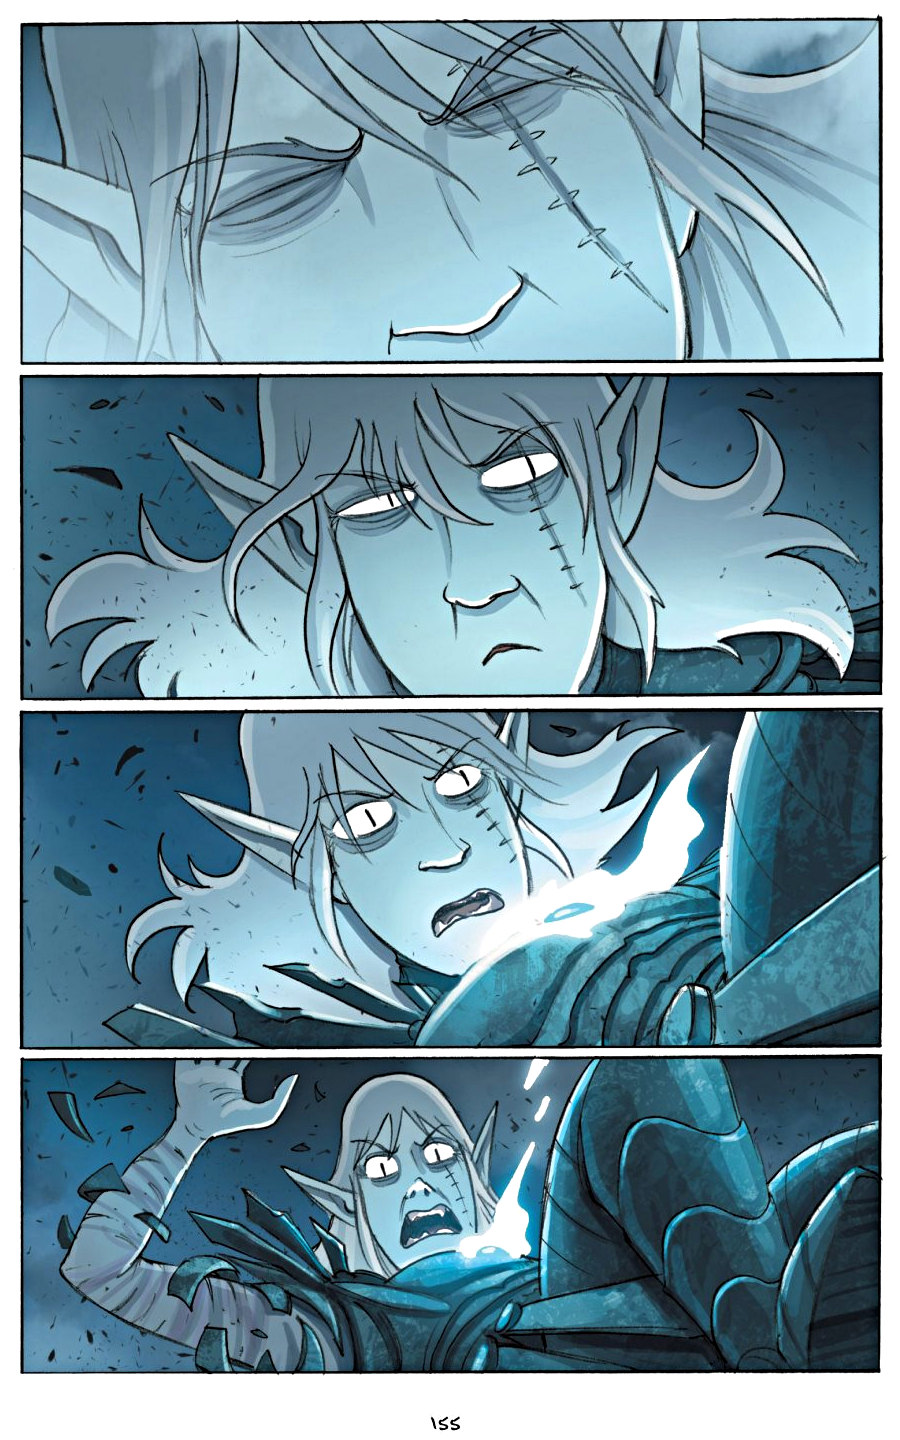 page 155 of amulet 5 prince of the elves graphic novel